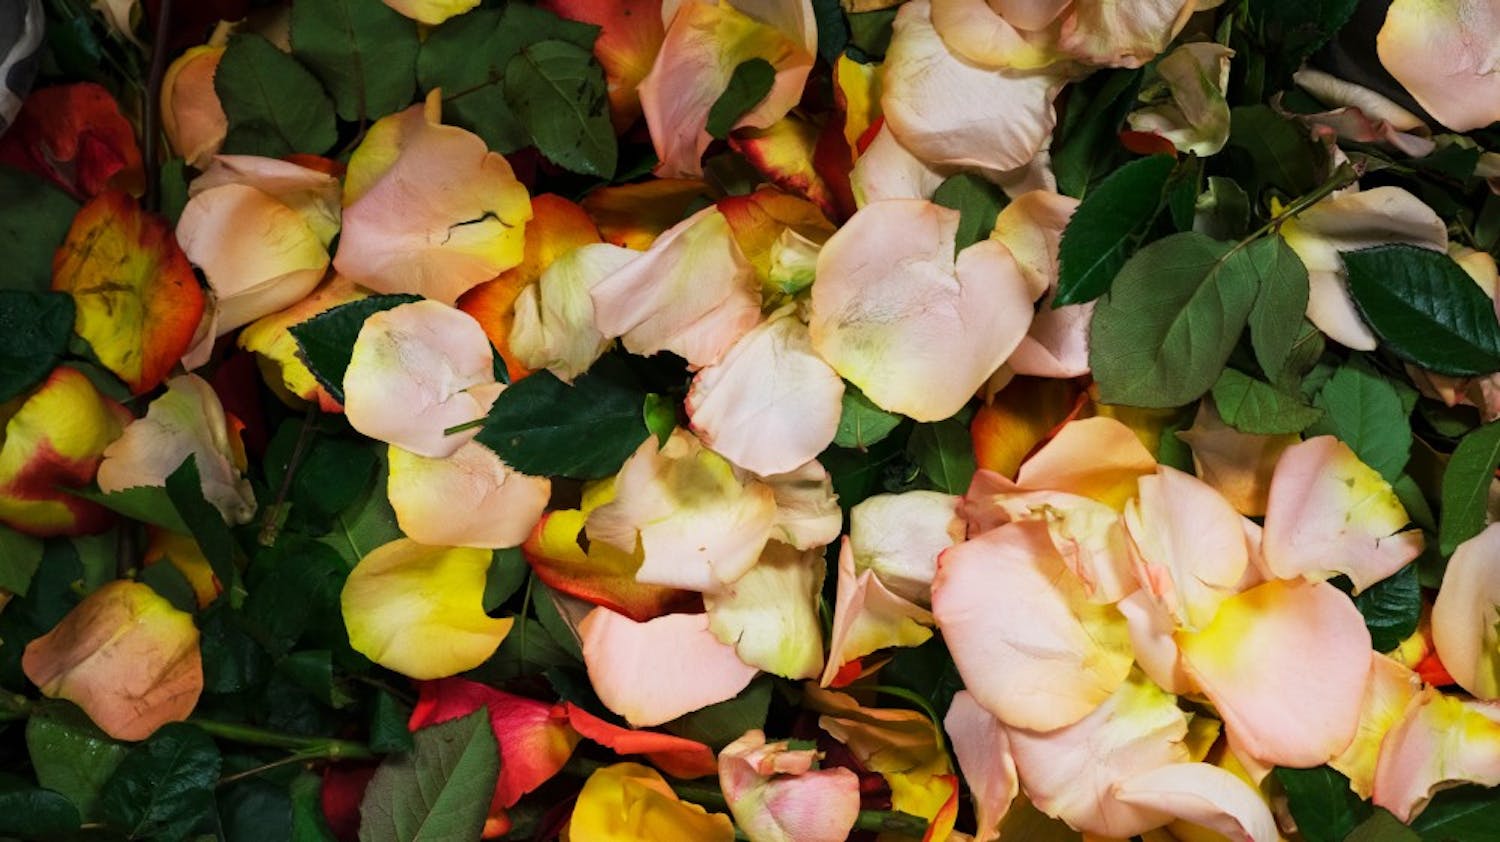 Flower petals and leaves fall on the floor of Mary M's Walnut House Flowers as family friends Tricia Rochyby and Earl Reagan strip roses of their thorns, leaves and exterior bruised petals. The roses, which are grown in Ecuador, arrive at the flower shop on Second Street in bundles of 25.